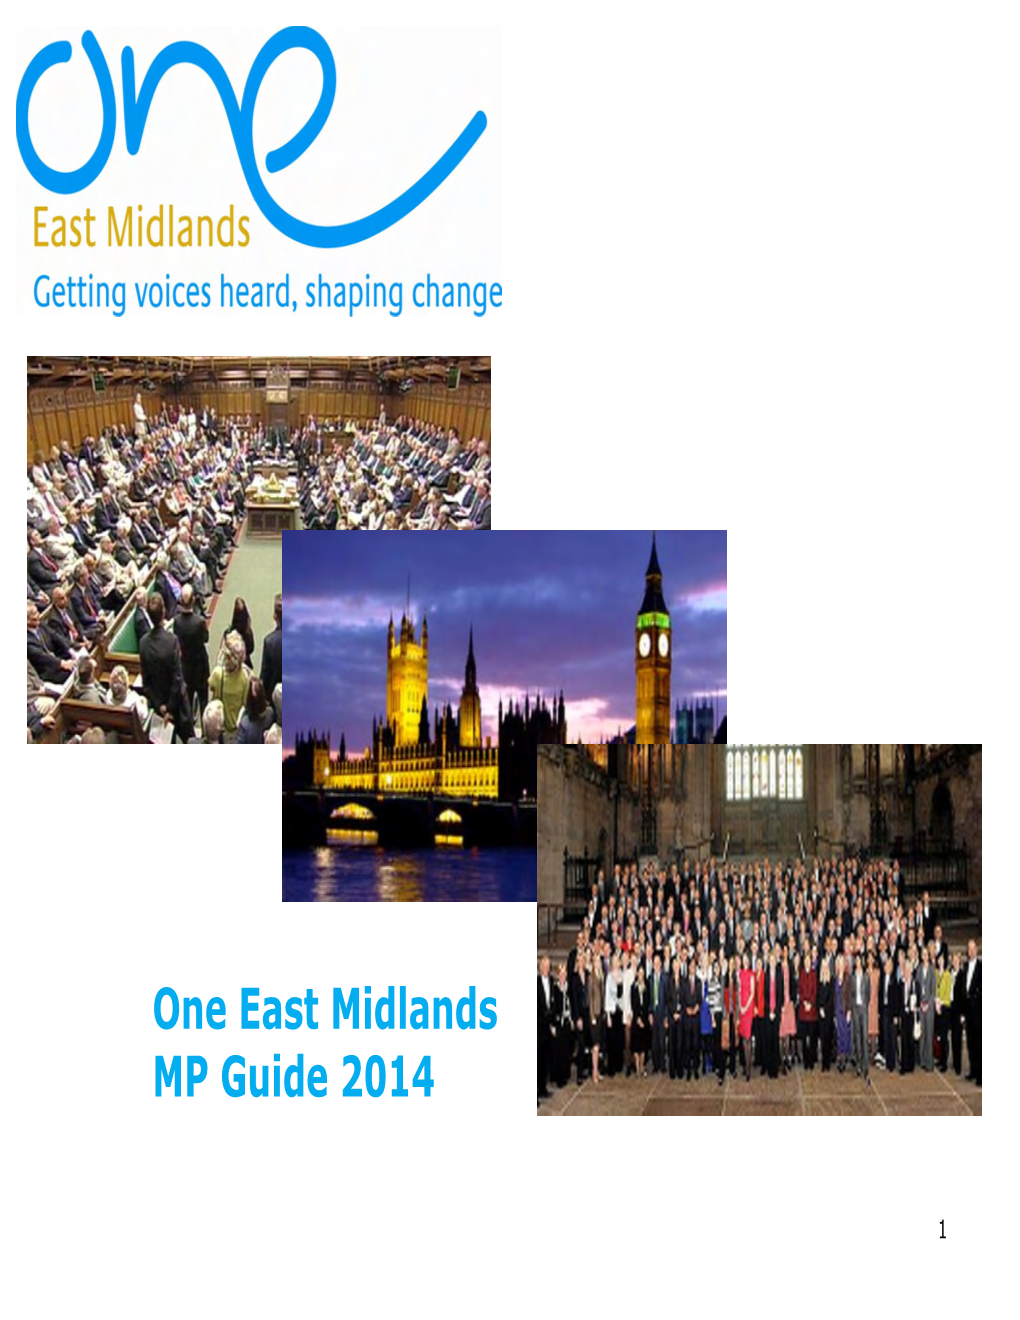 One East Midlands MP Guide 2014